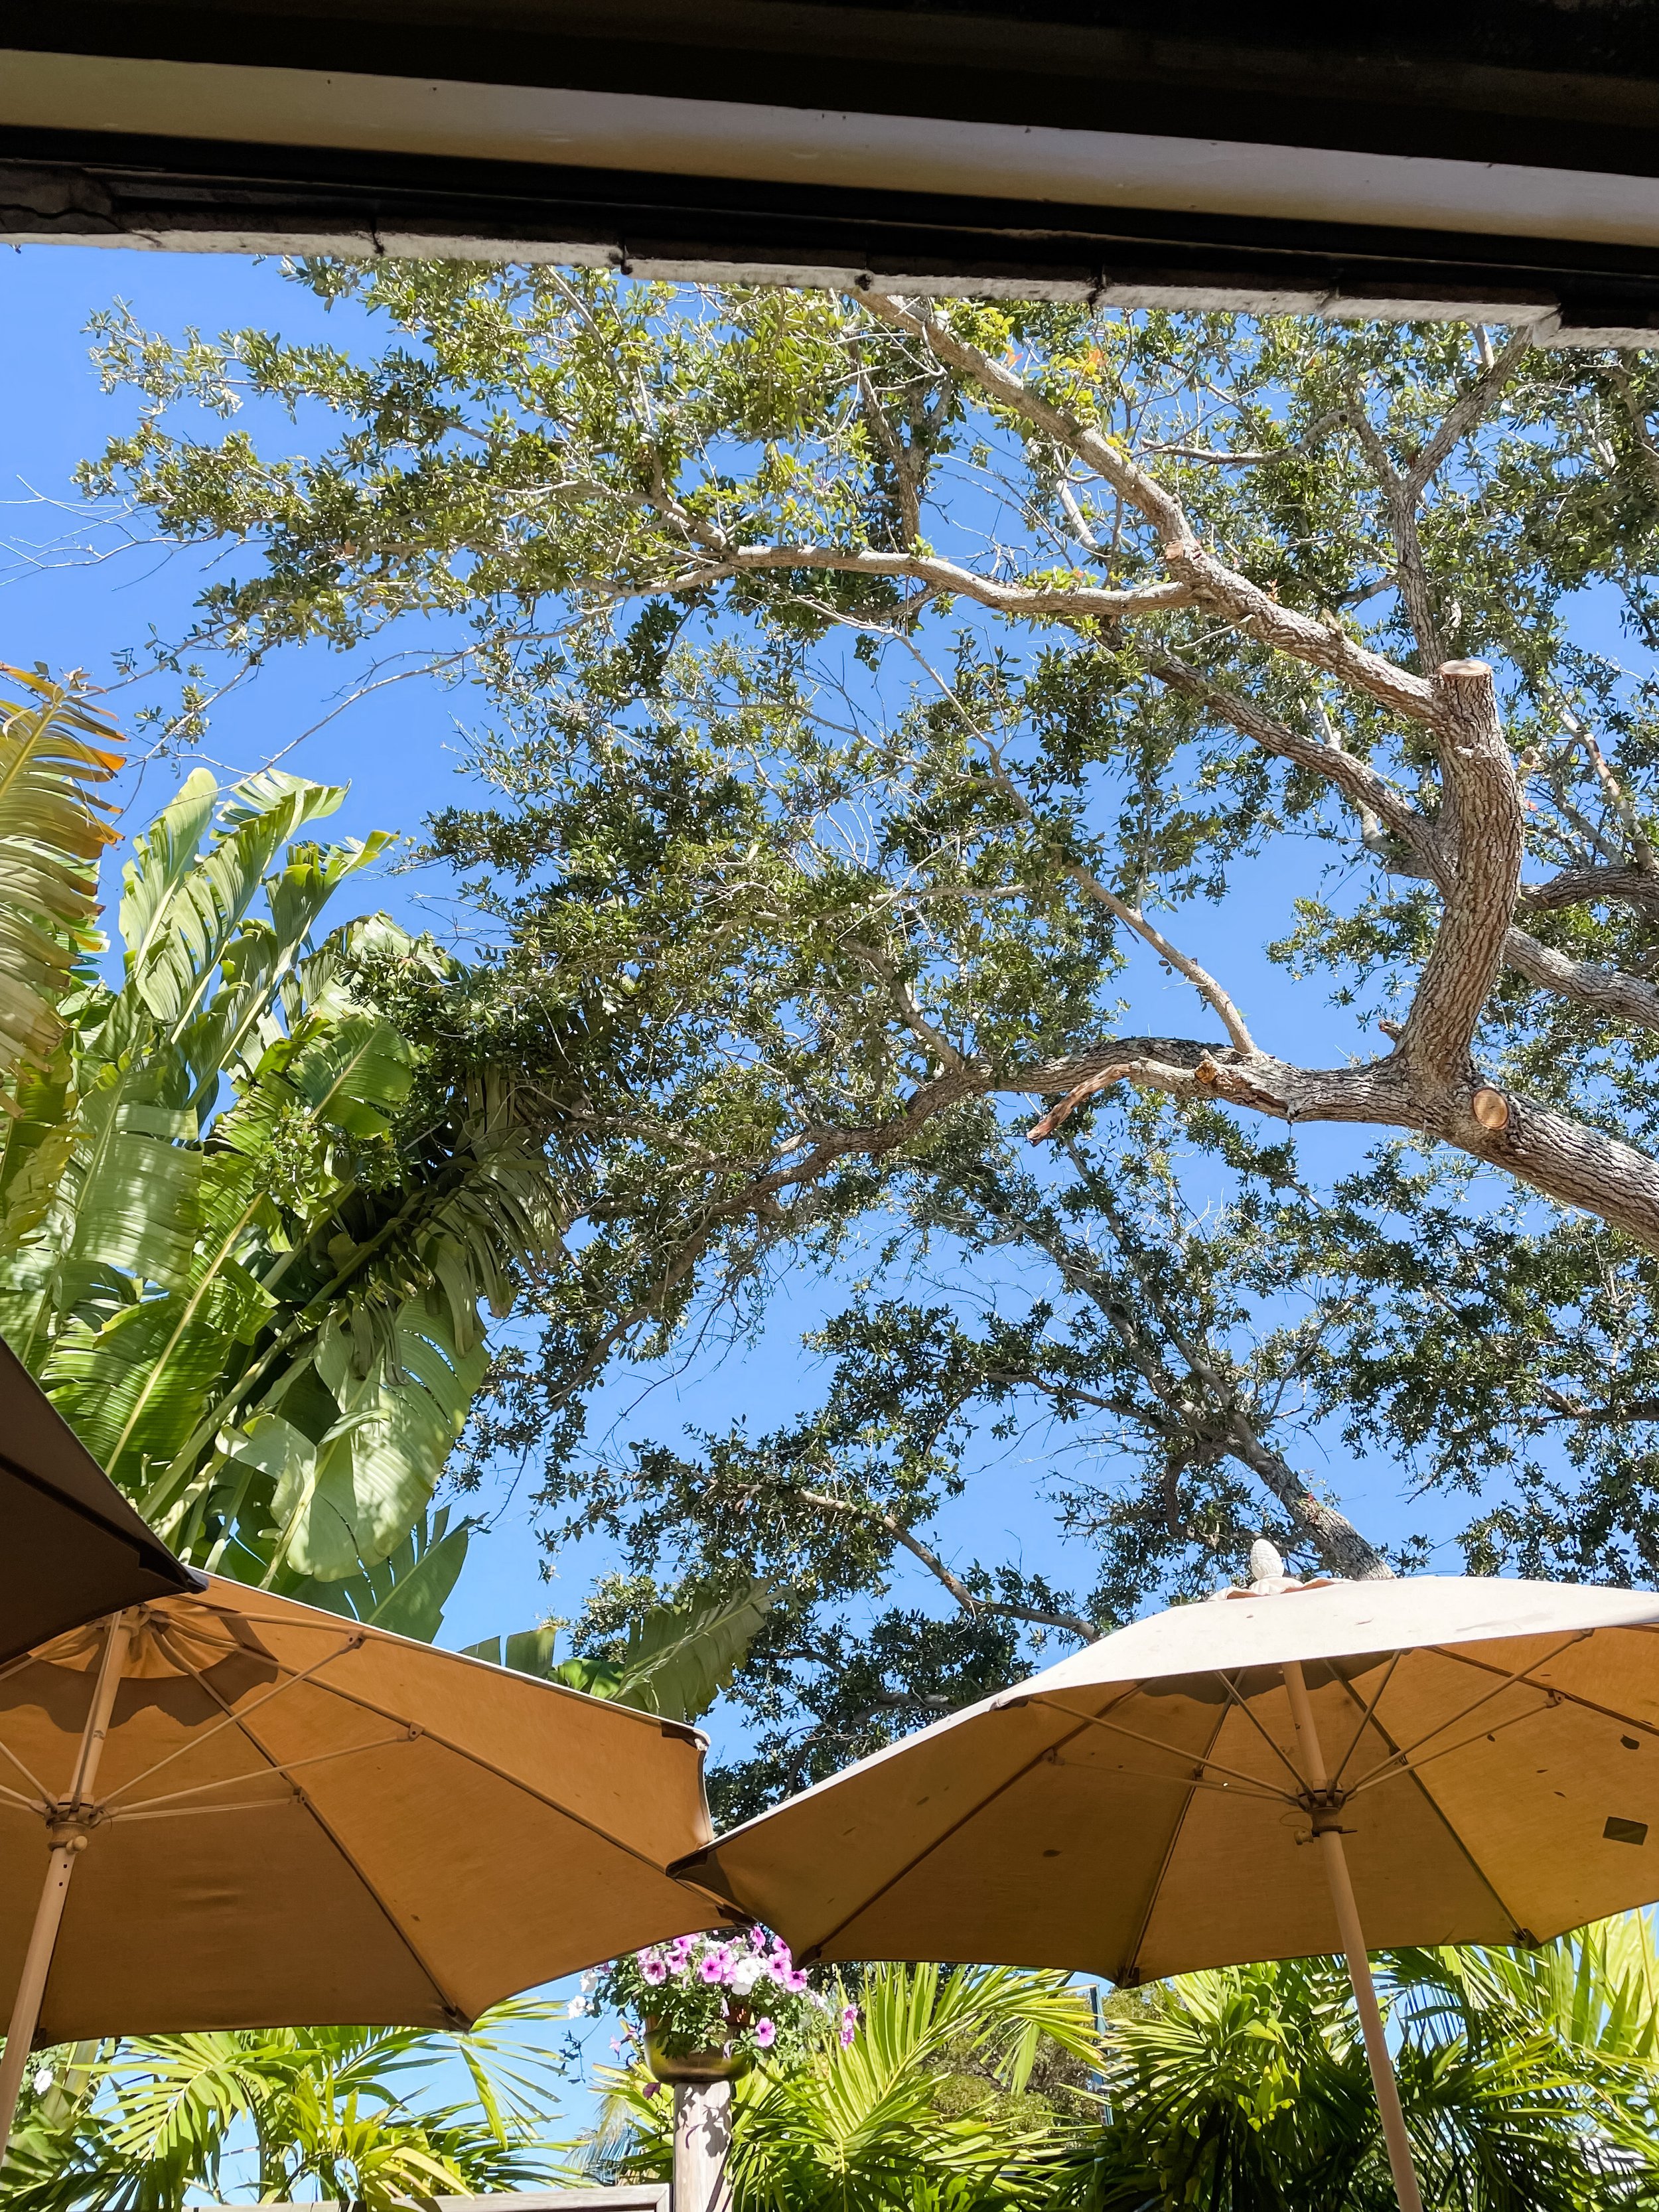 View from The Sun Garden Cafe in Siesta Key, Florida